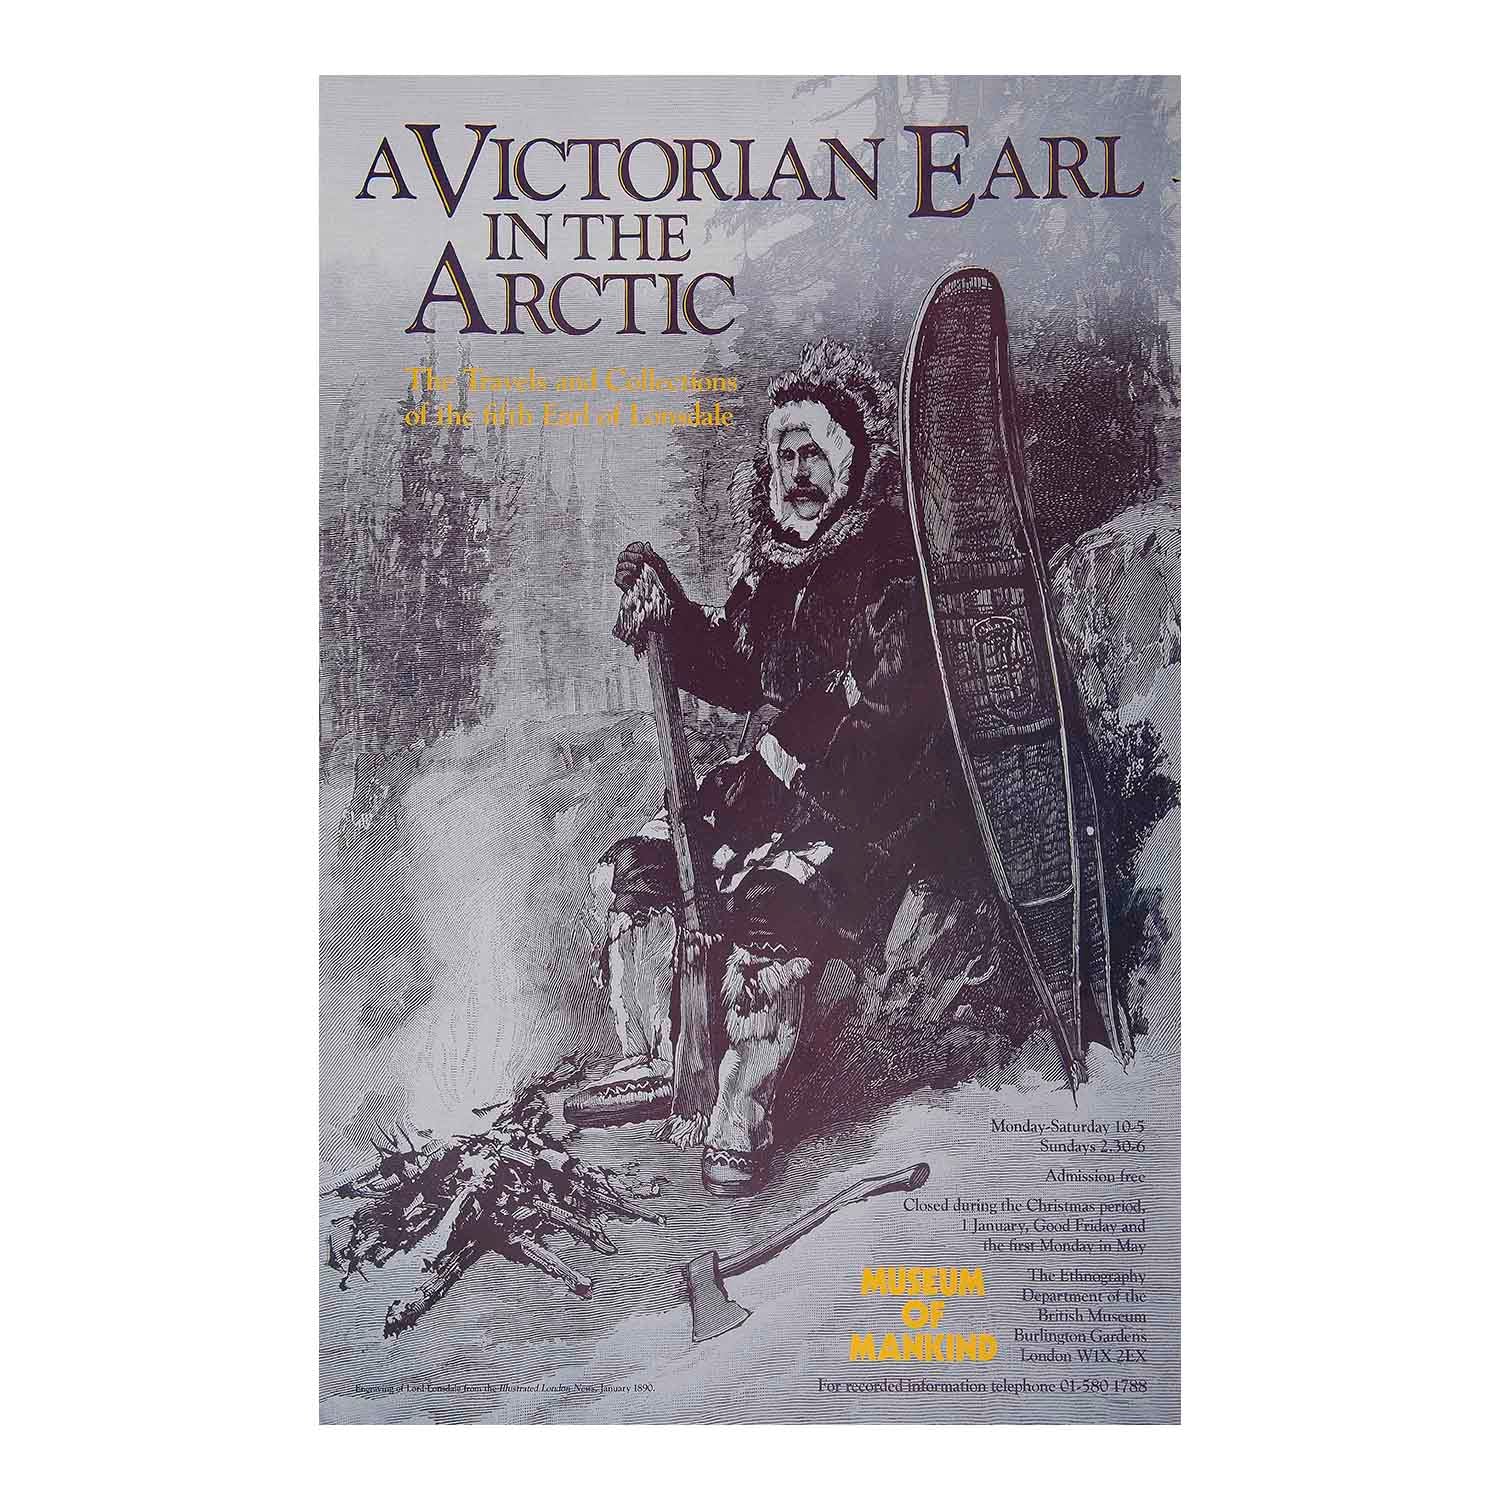 exhibition poster, Victorian Earl in the Artic. The travels and collections of the fifth earl of Lonsdale, held at the Museum of Mankind, 1989